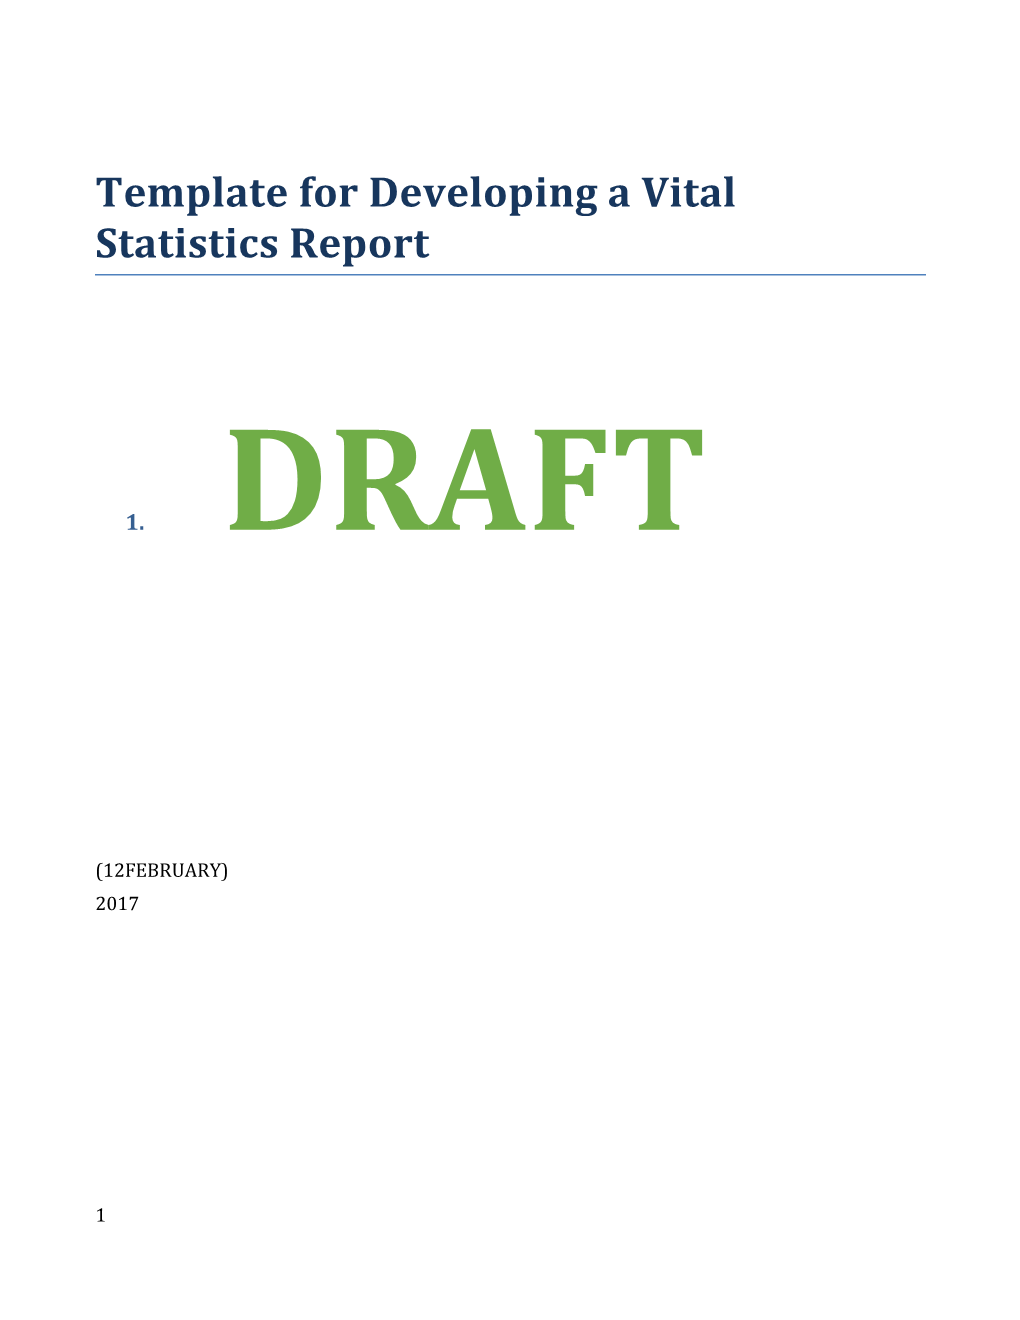 Template for Developing a Vital Statistics Report